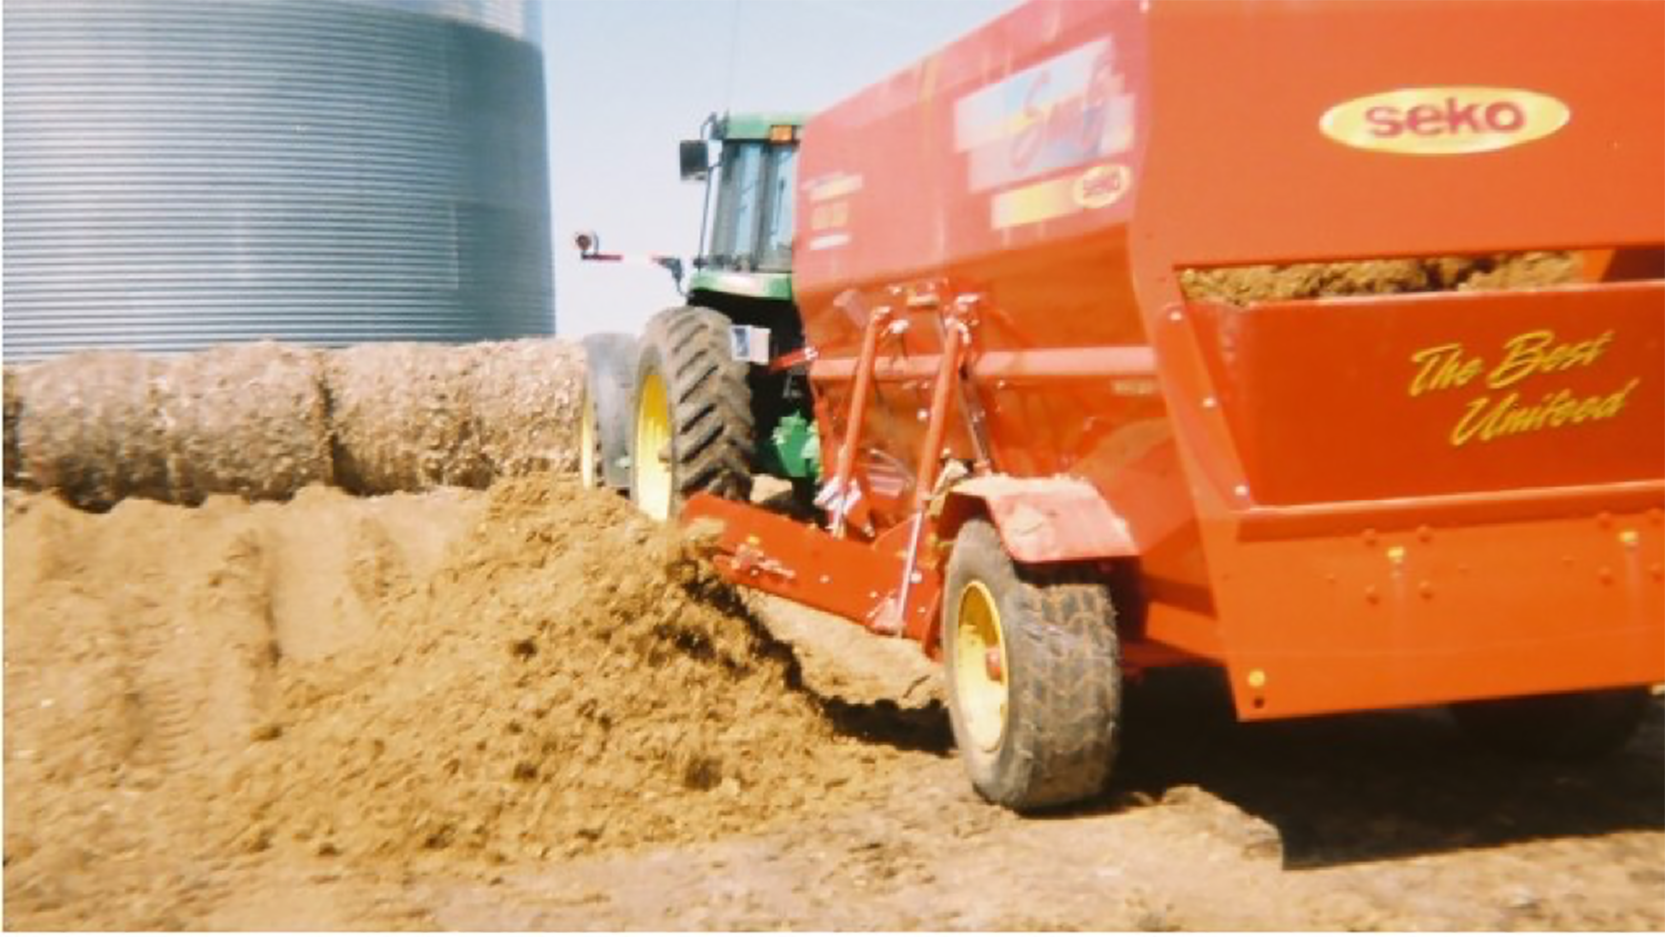 A green tractor pulling a red wagon next to a pile of wet distillers grains.